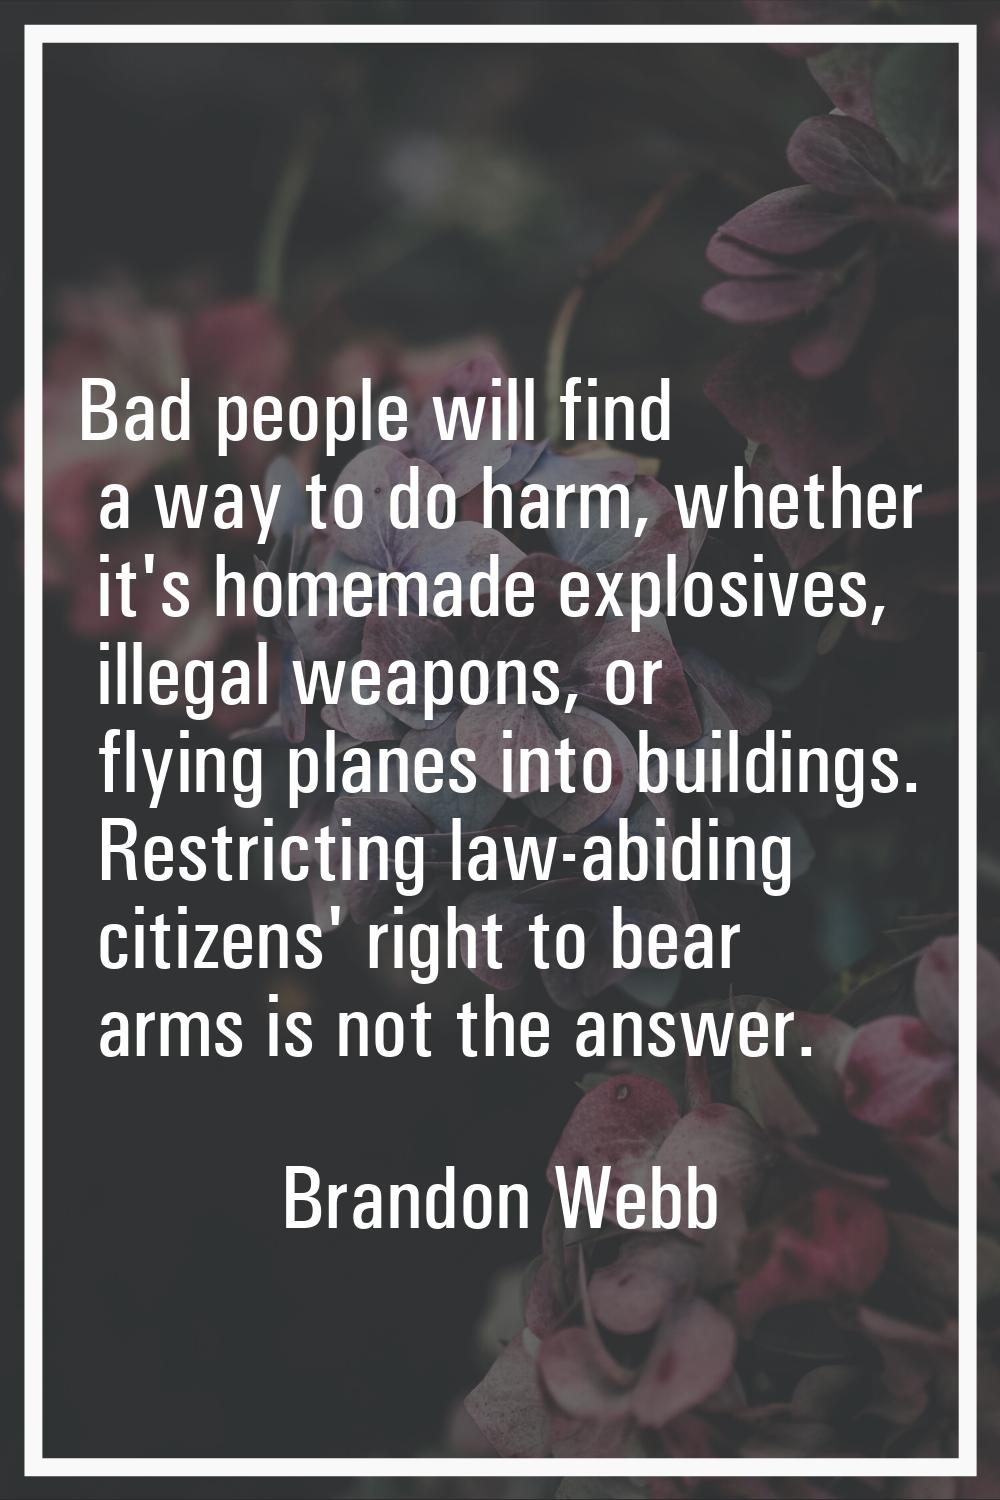 Bad people will find a way to do harm, whether it's homemade explosives, illegal weapons, or flying